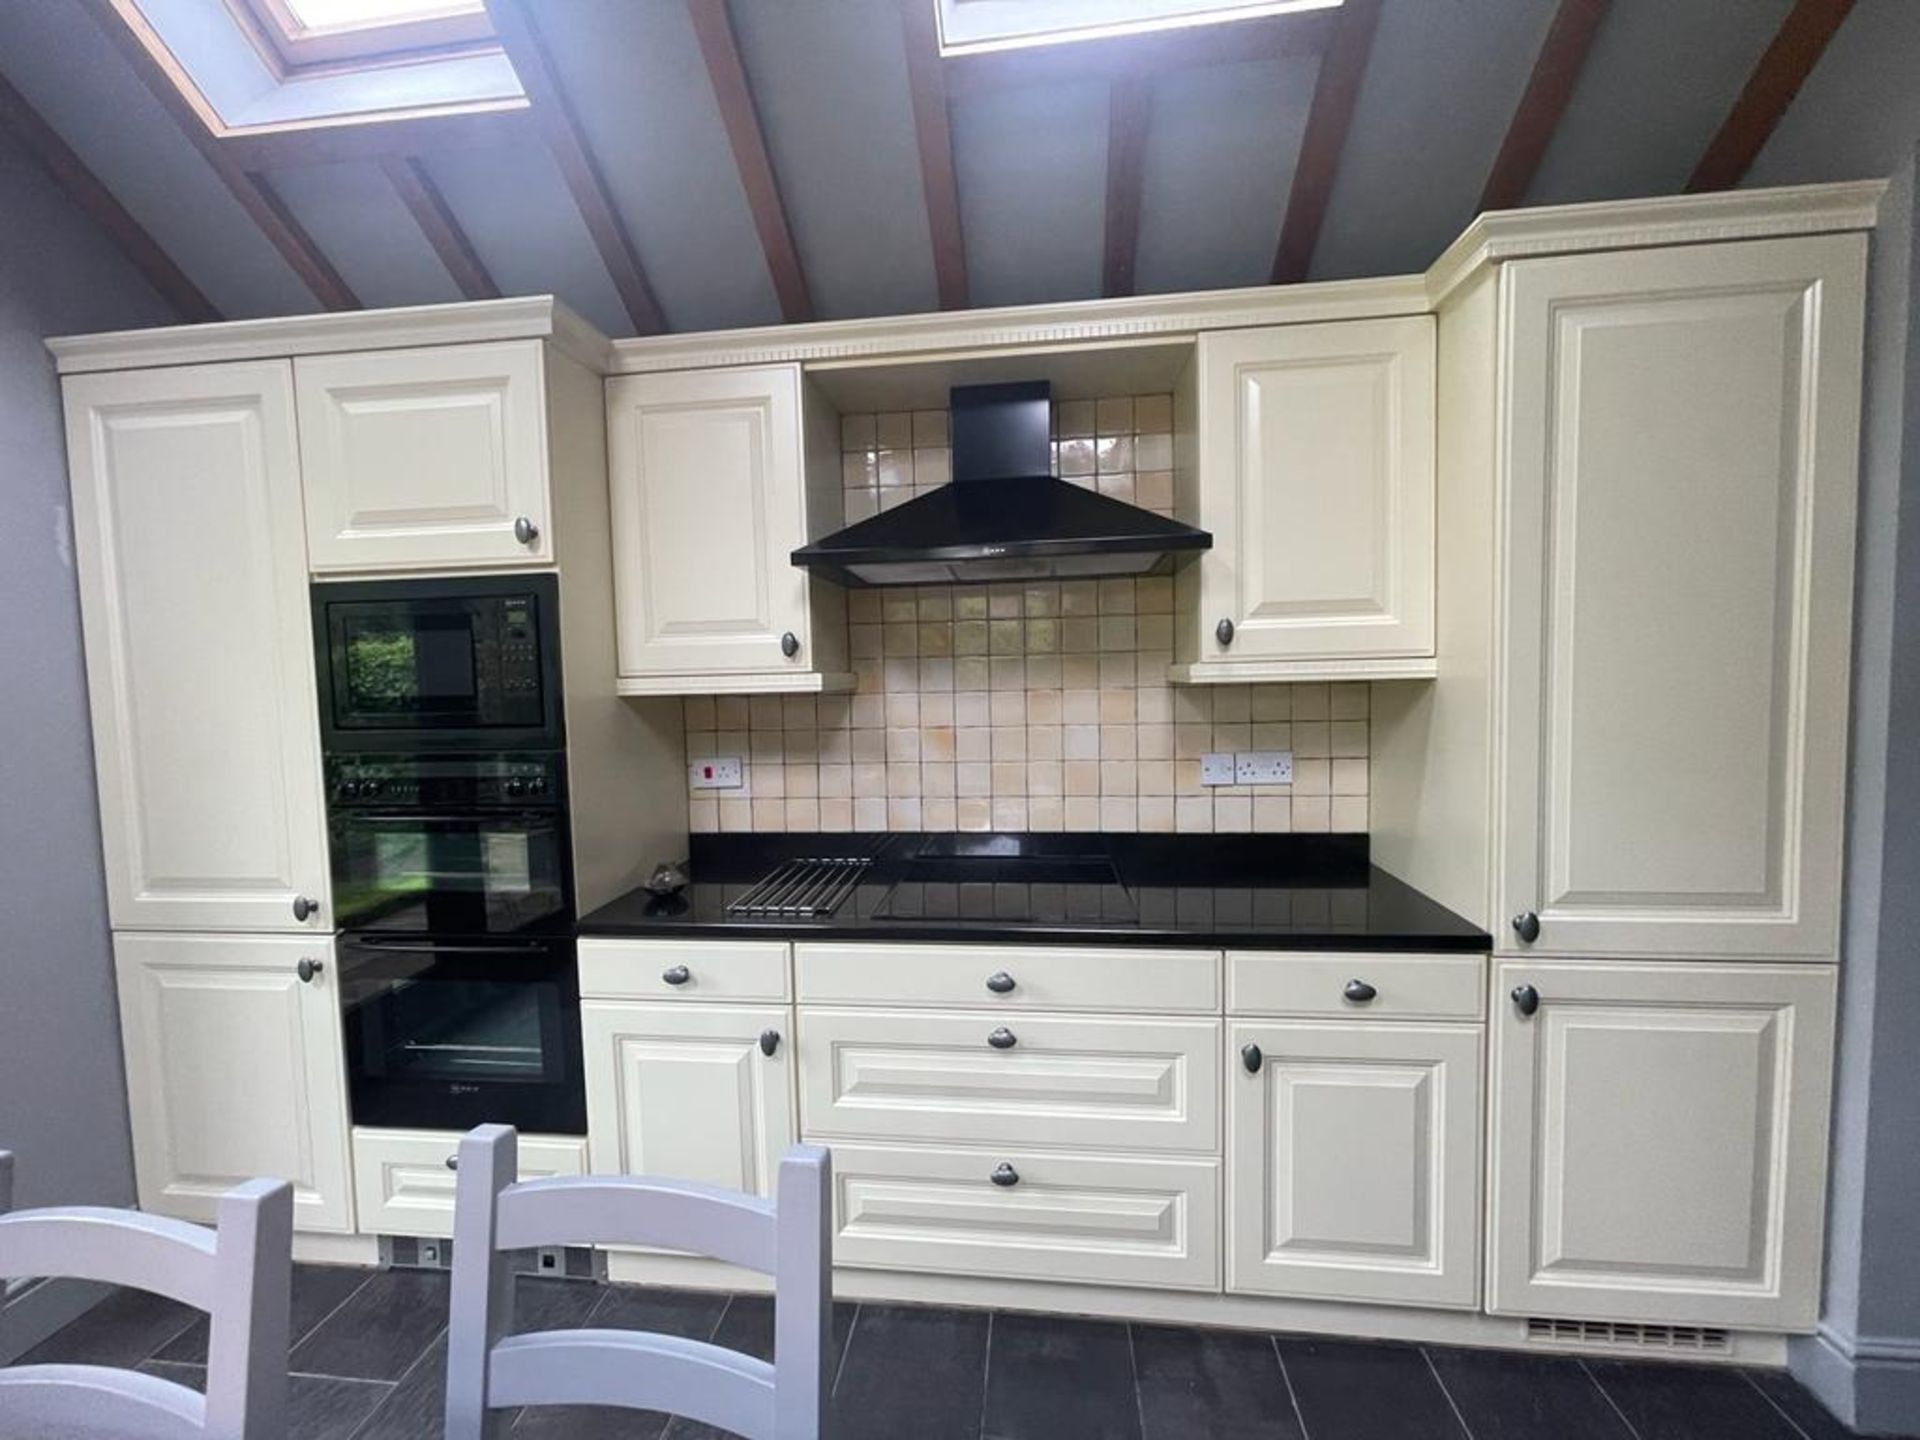 1 x Bespoke Keller Kitchen With Branded Appliances - From An Exclusive Property - No VAT On The - Image 87 of 127